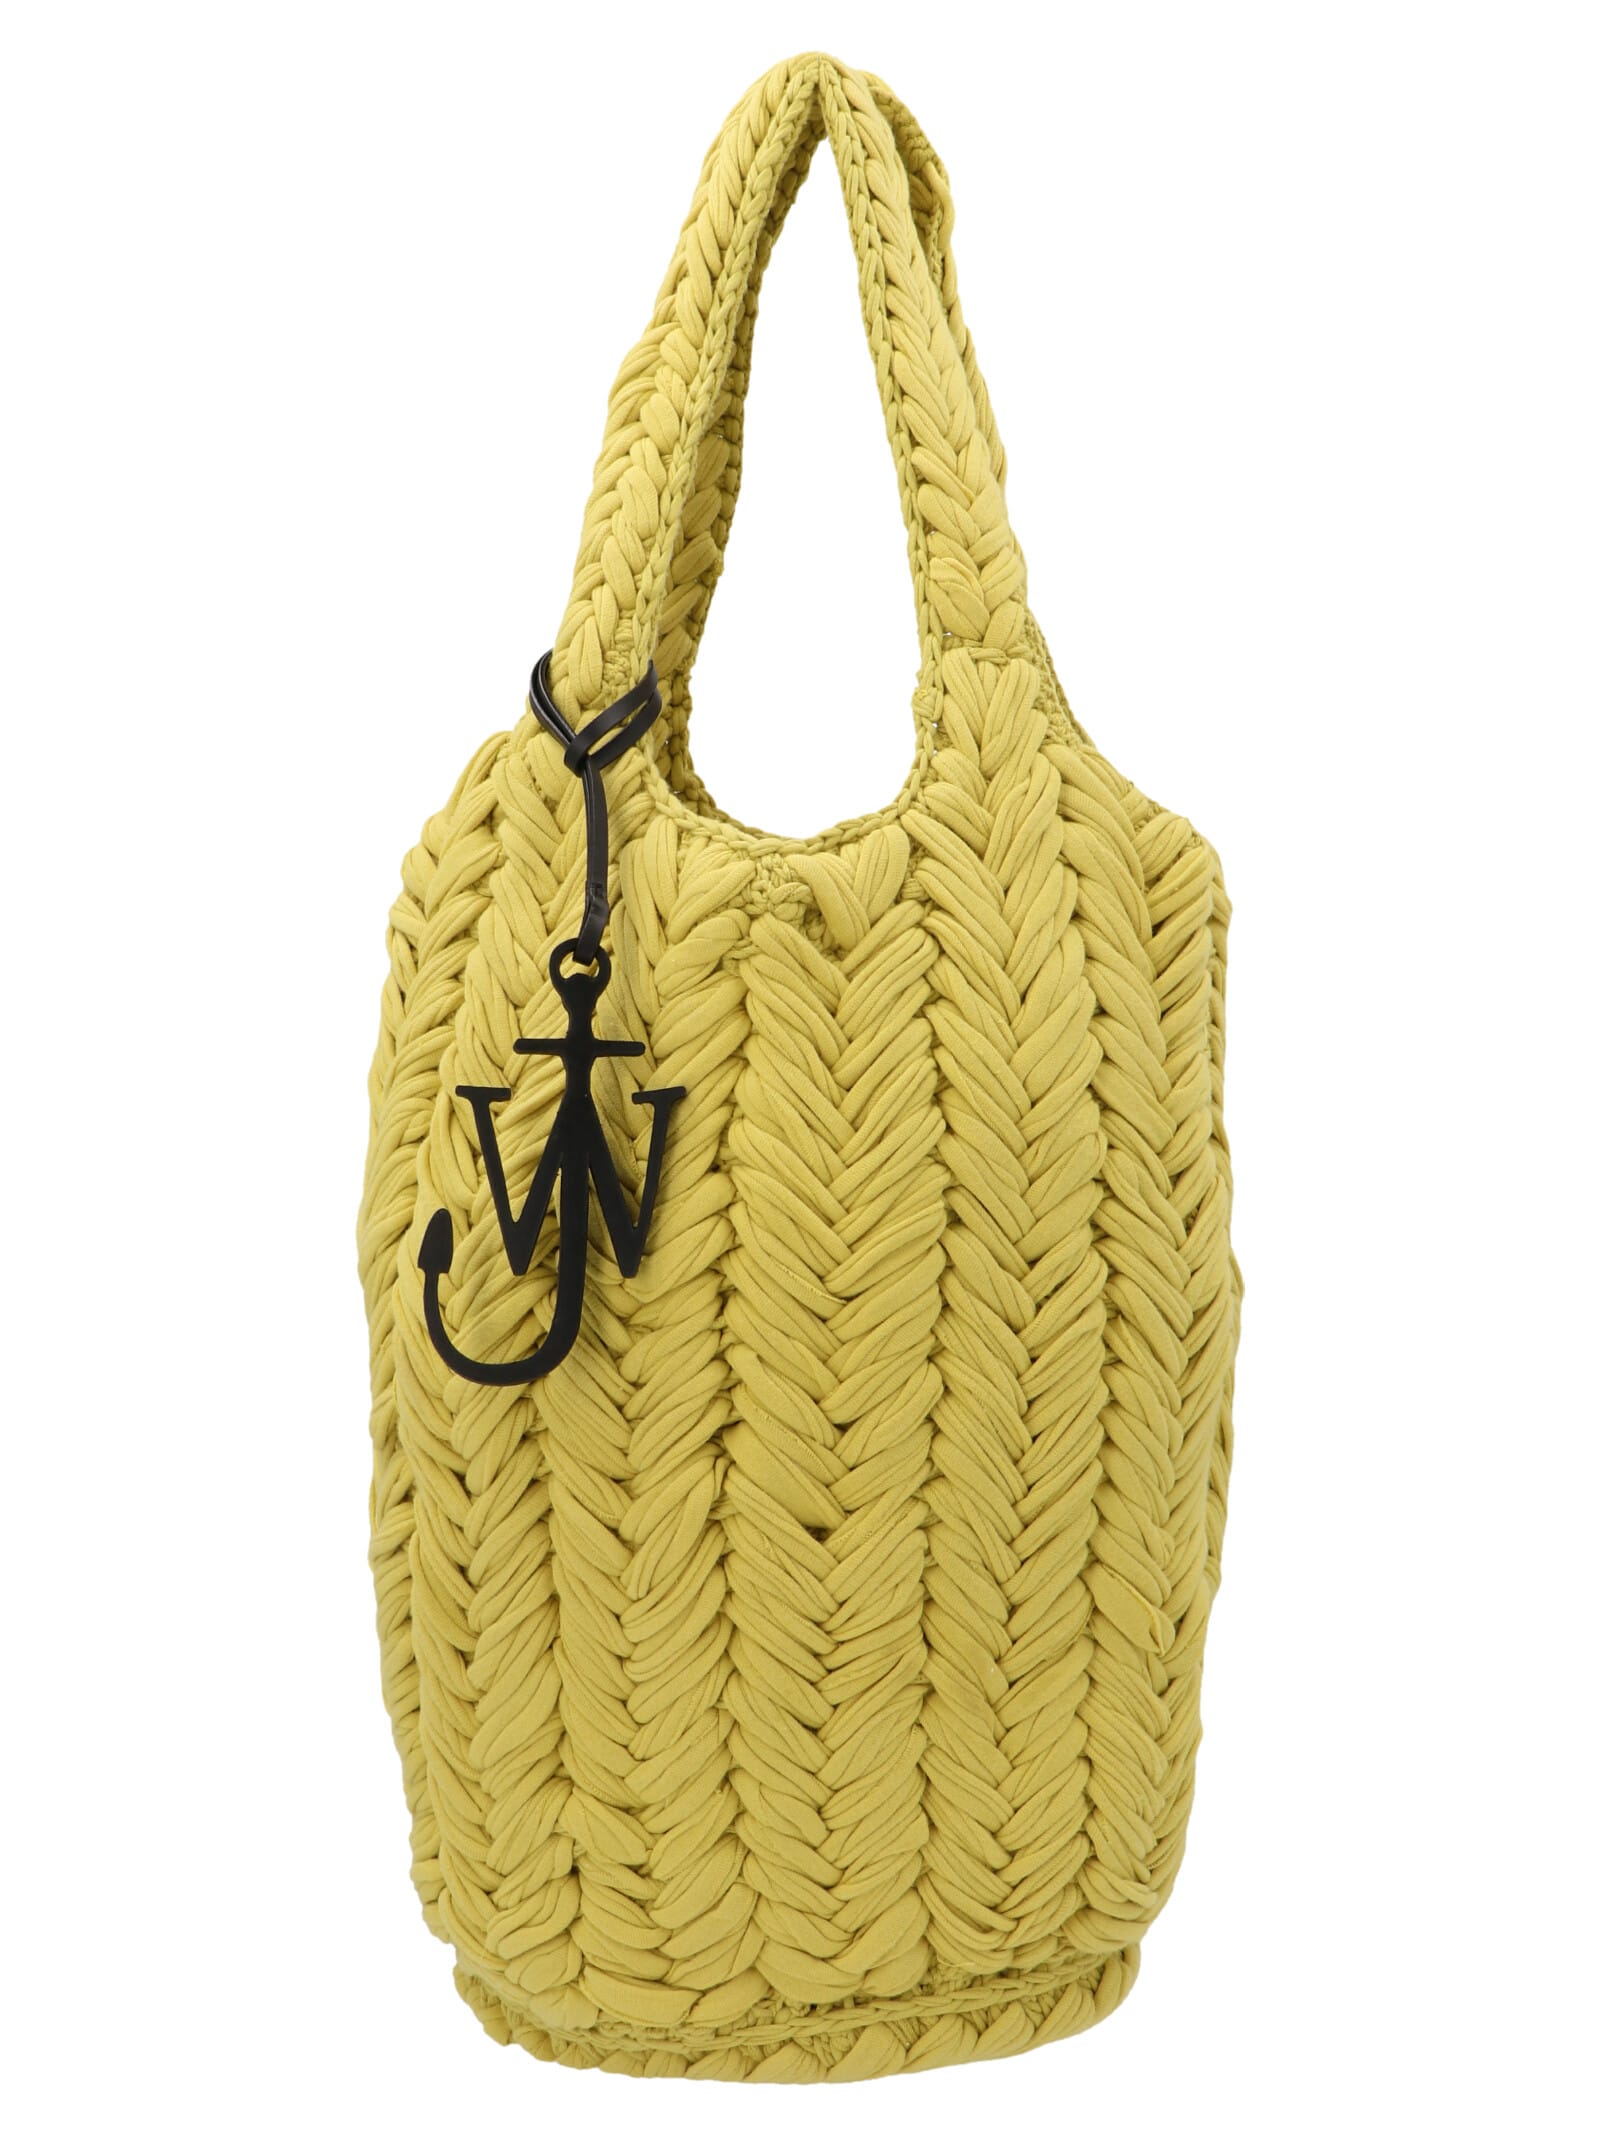 J.w. Anderson knitted Shopper Bag